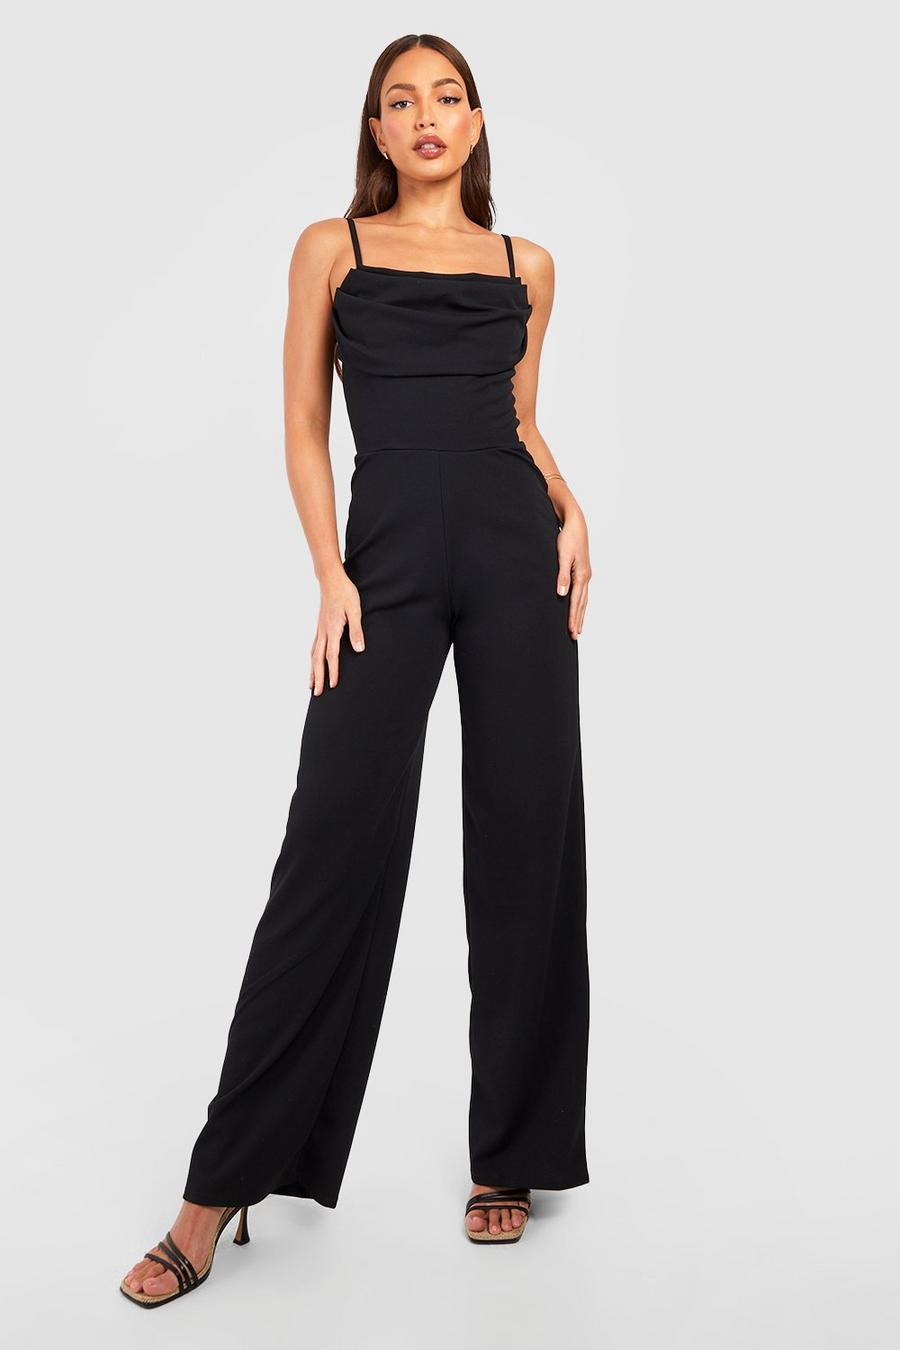 Black Tall Strappy Cowl Wide Leg Jumpsuit